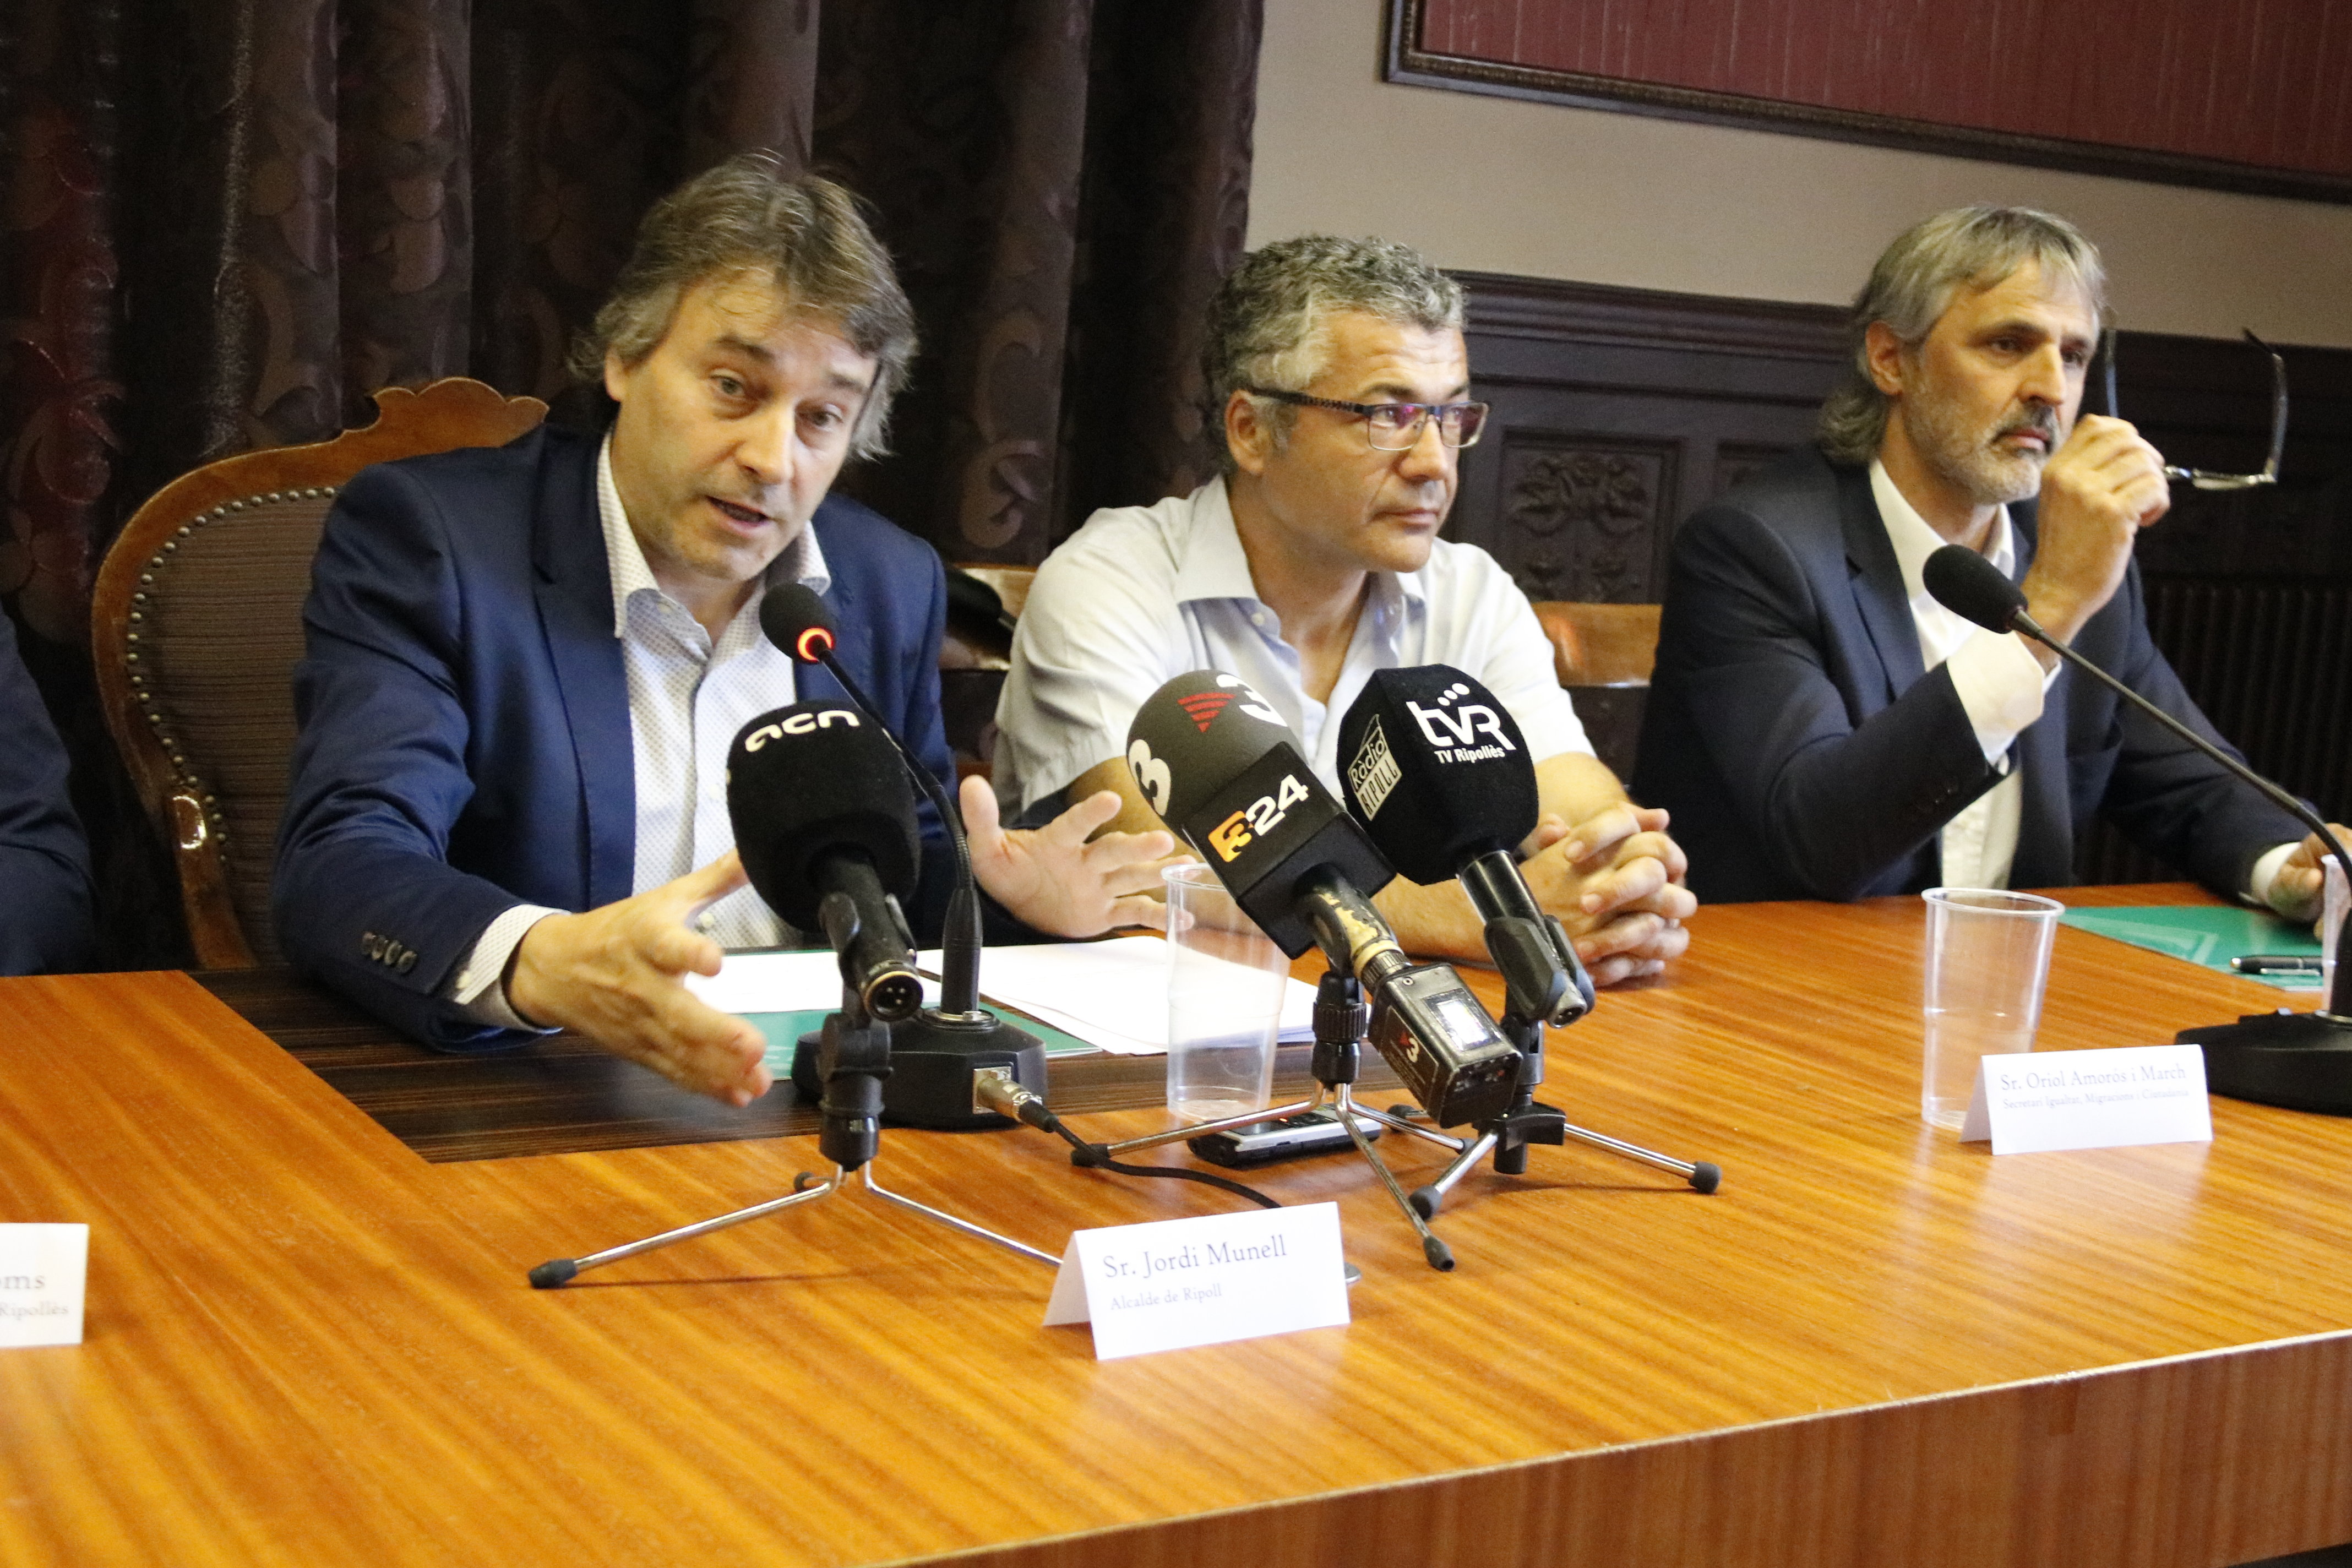 From left to right: the mayor of Ripoll, secretary of equality on July 26 2018 (by Lourdes Casademont)